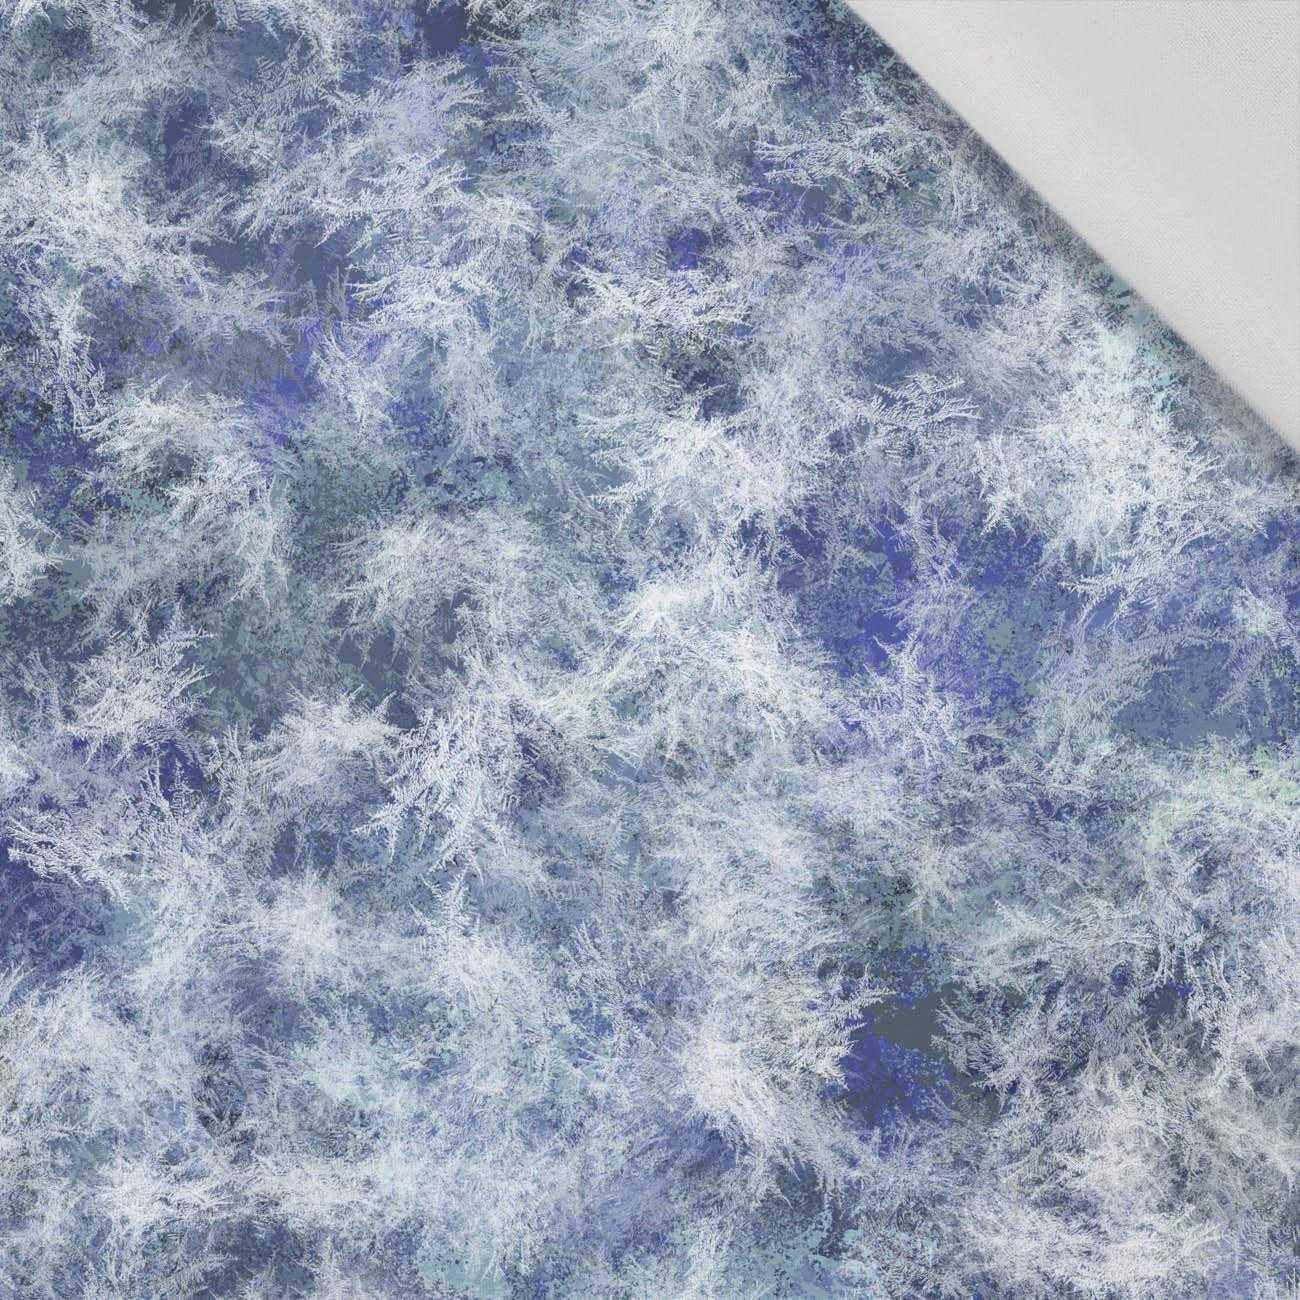 FROST PAT. 2 (WINTER IS COMING) - Cotton woven fabric